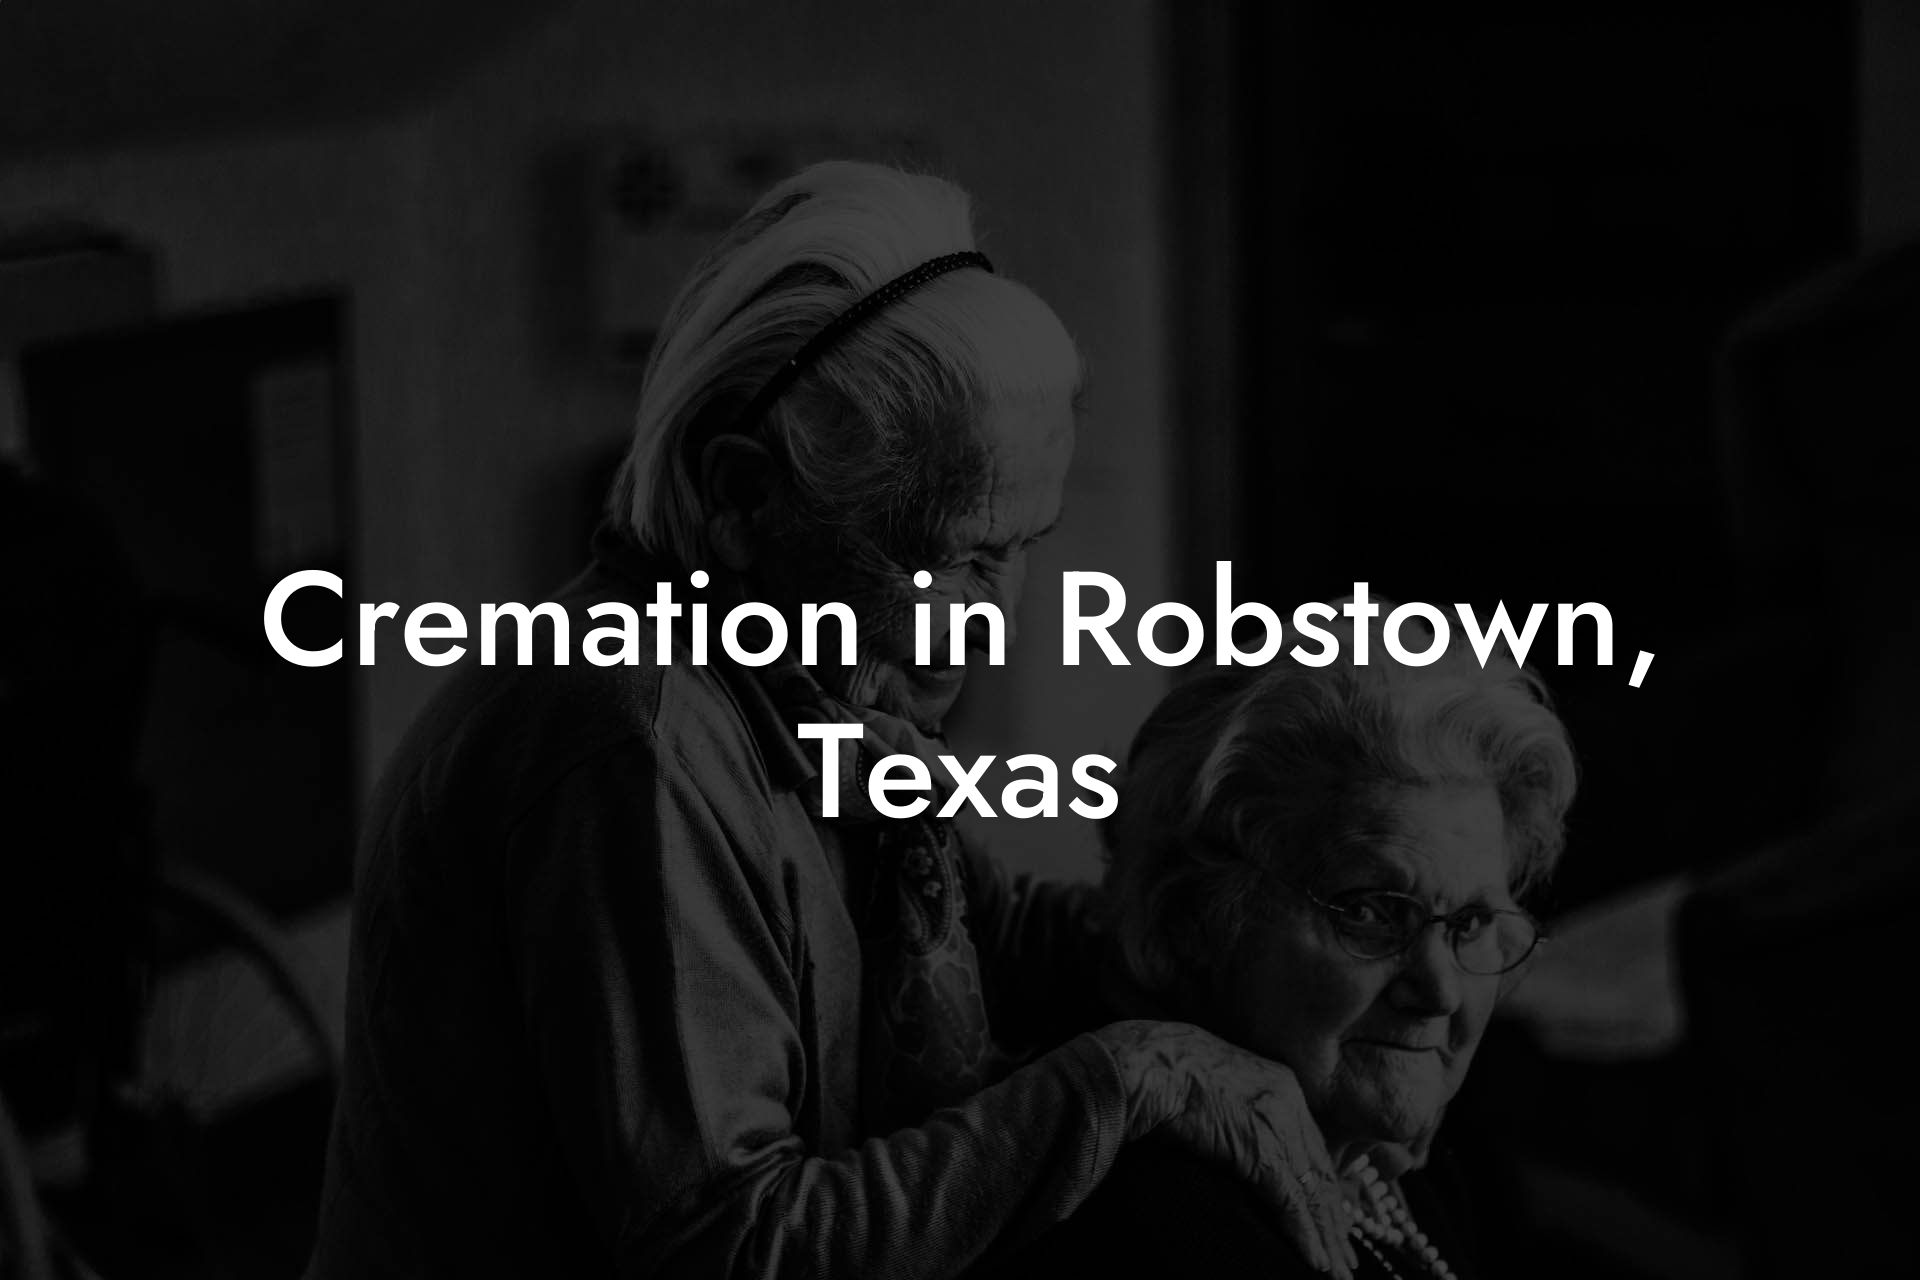 Cremation in Robstown, Texas